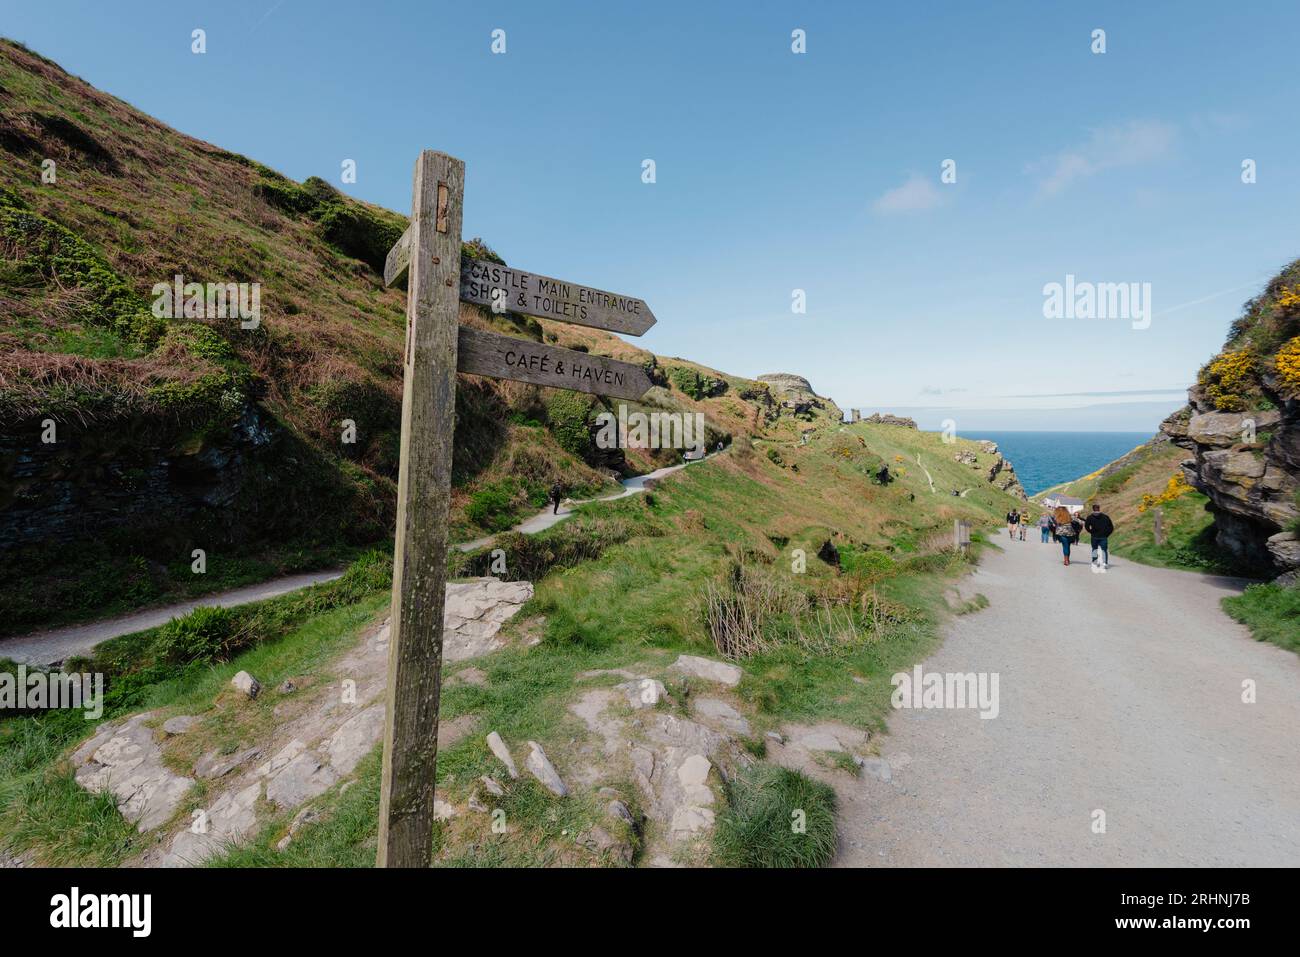 A wooden signpost directs people to the beach and castle at Tintagel in Cornwall UK Stock Photo